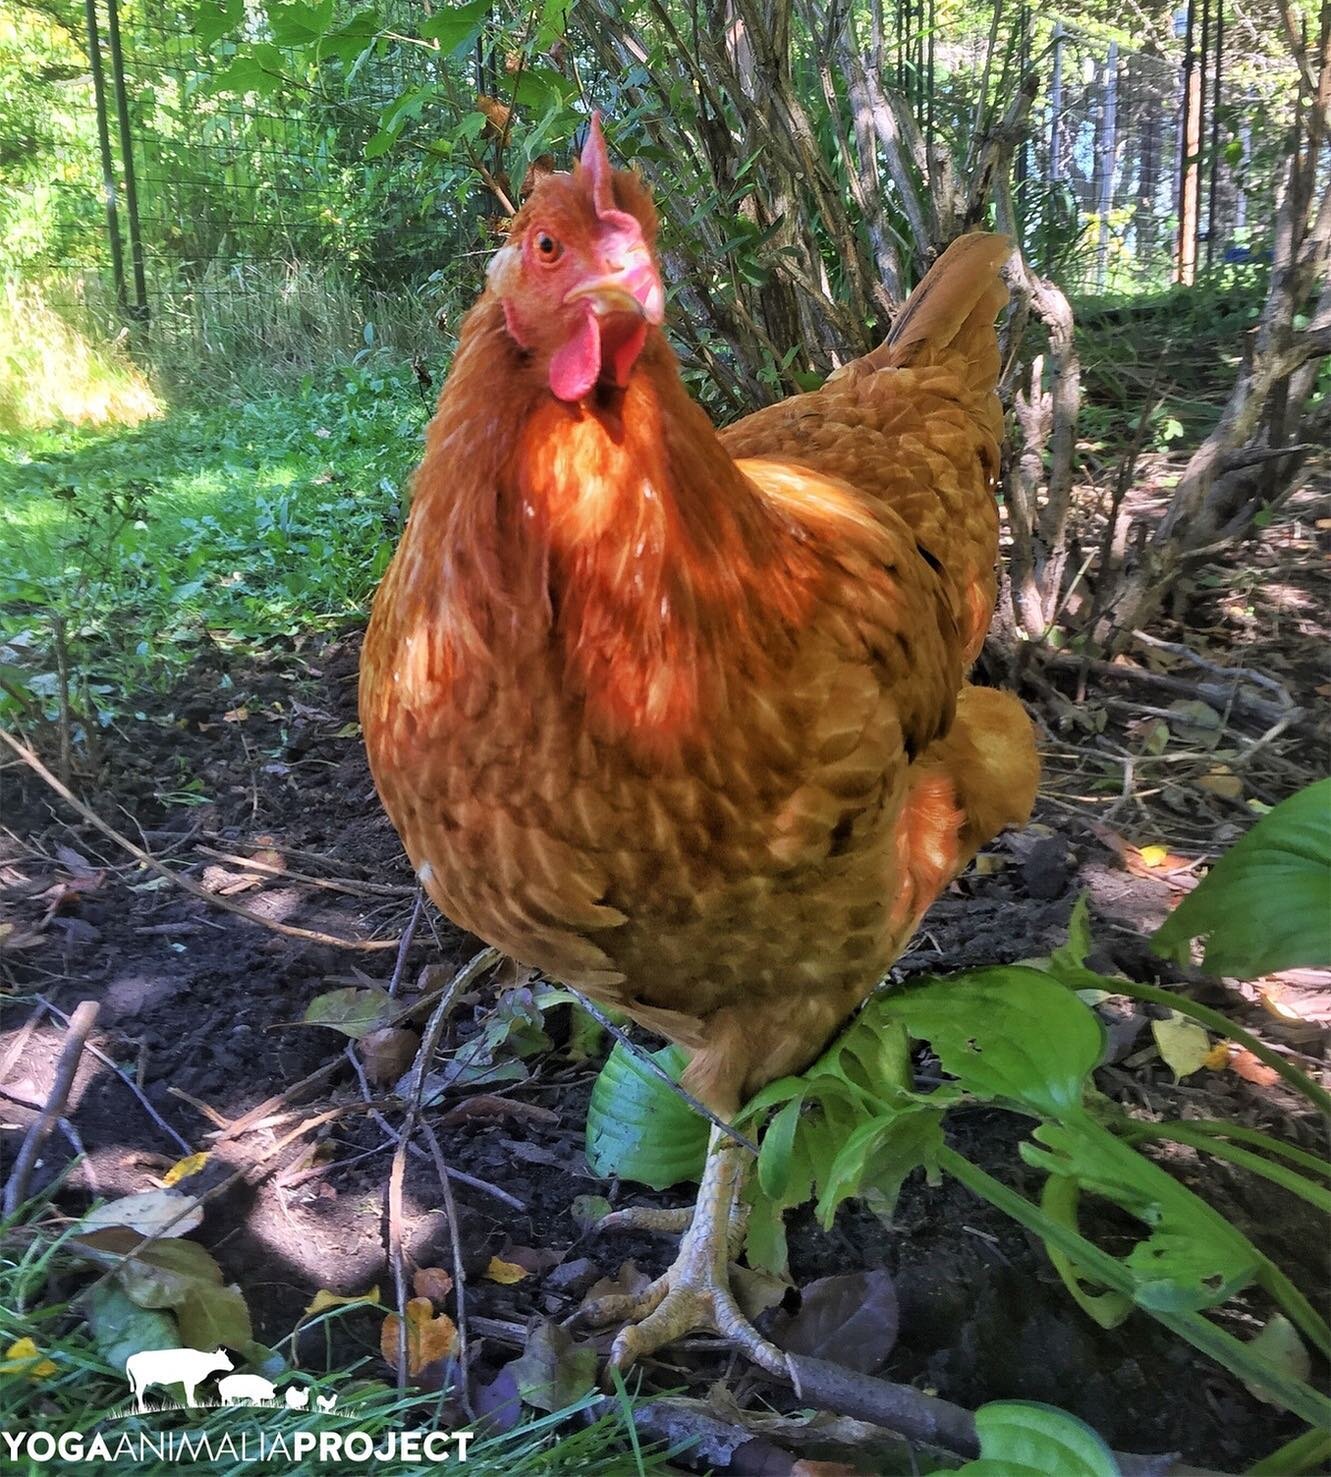 Yoga Animalia: Galline - Mia
Chicken Run Rescue, Twin Cities, Minnesota @chickenrunrescue 
So many wonderful places offered me respite whilst traveling from the east to the west, and one such place that fills my heart is Chicken Run in Minnesota. Tim